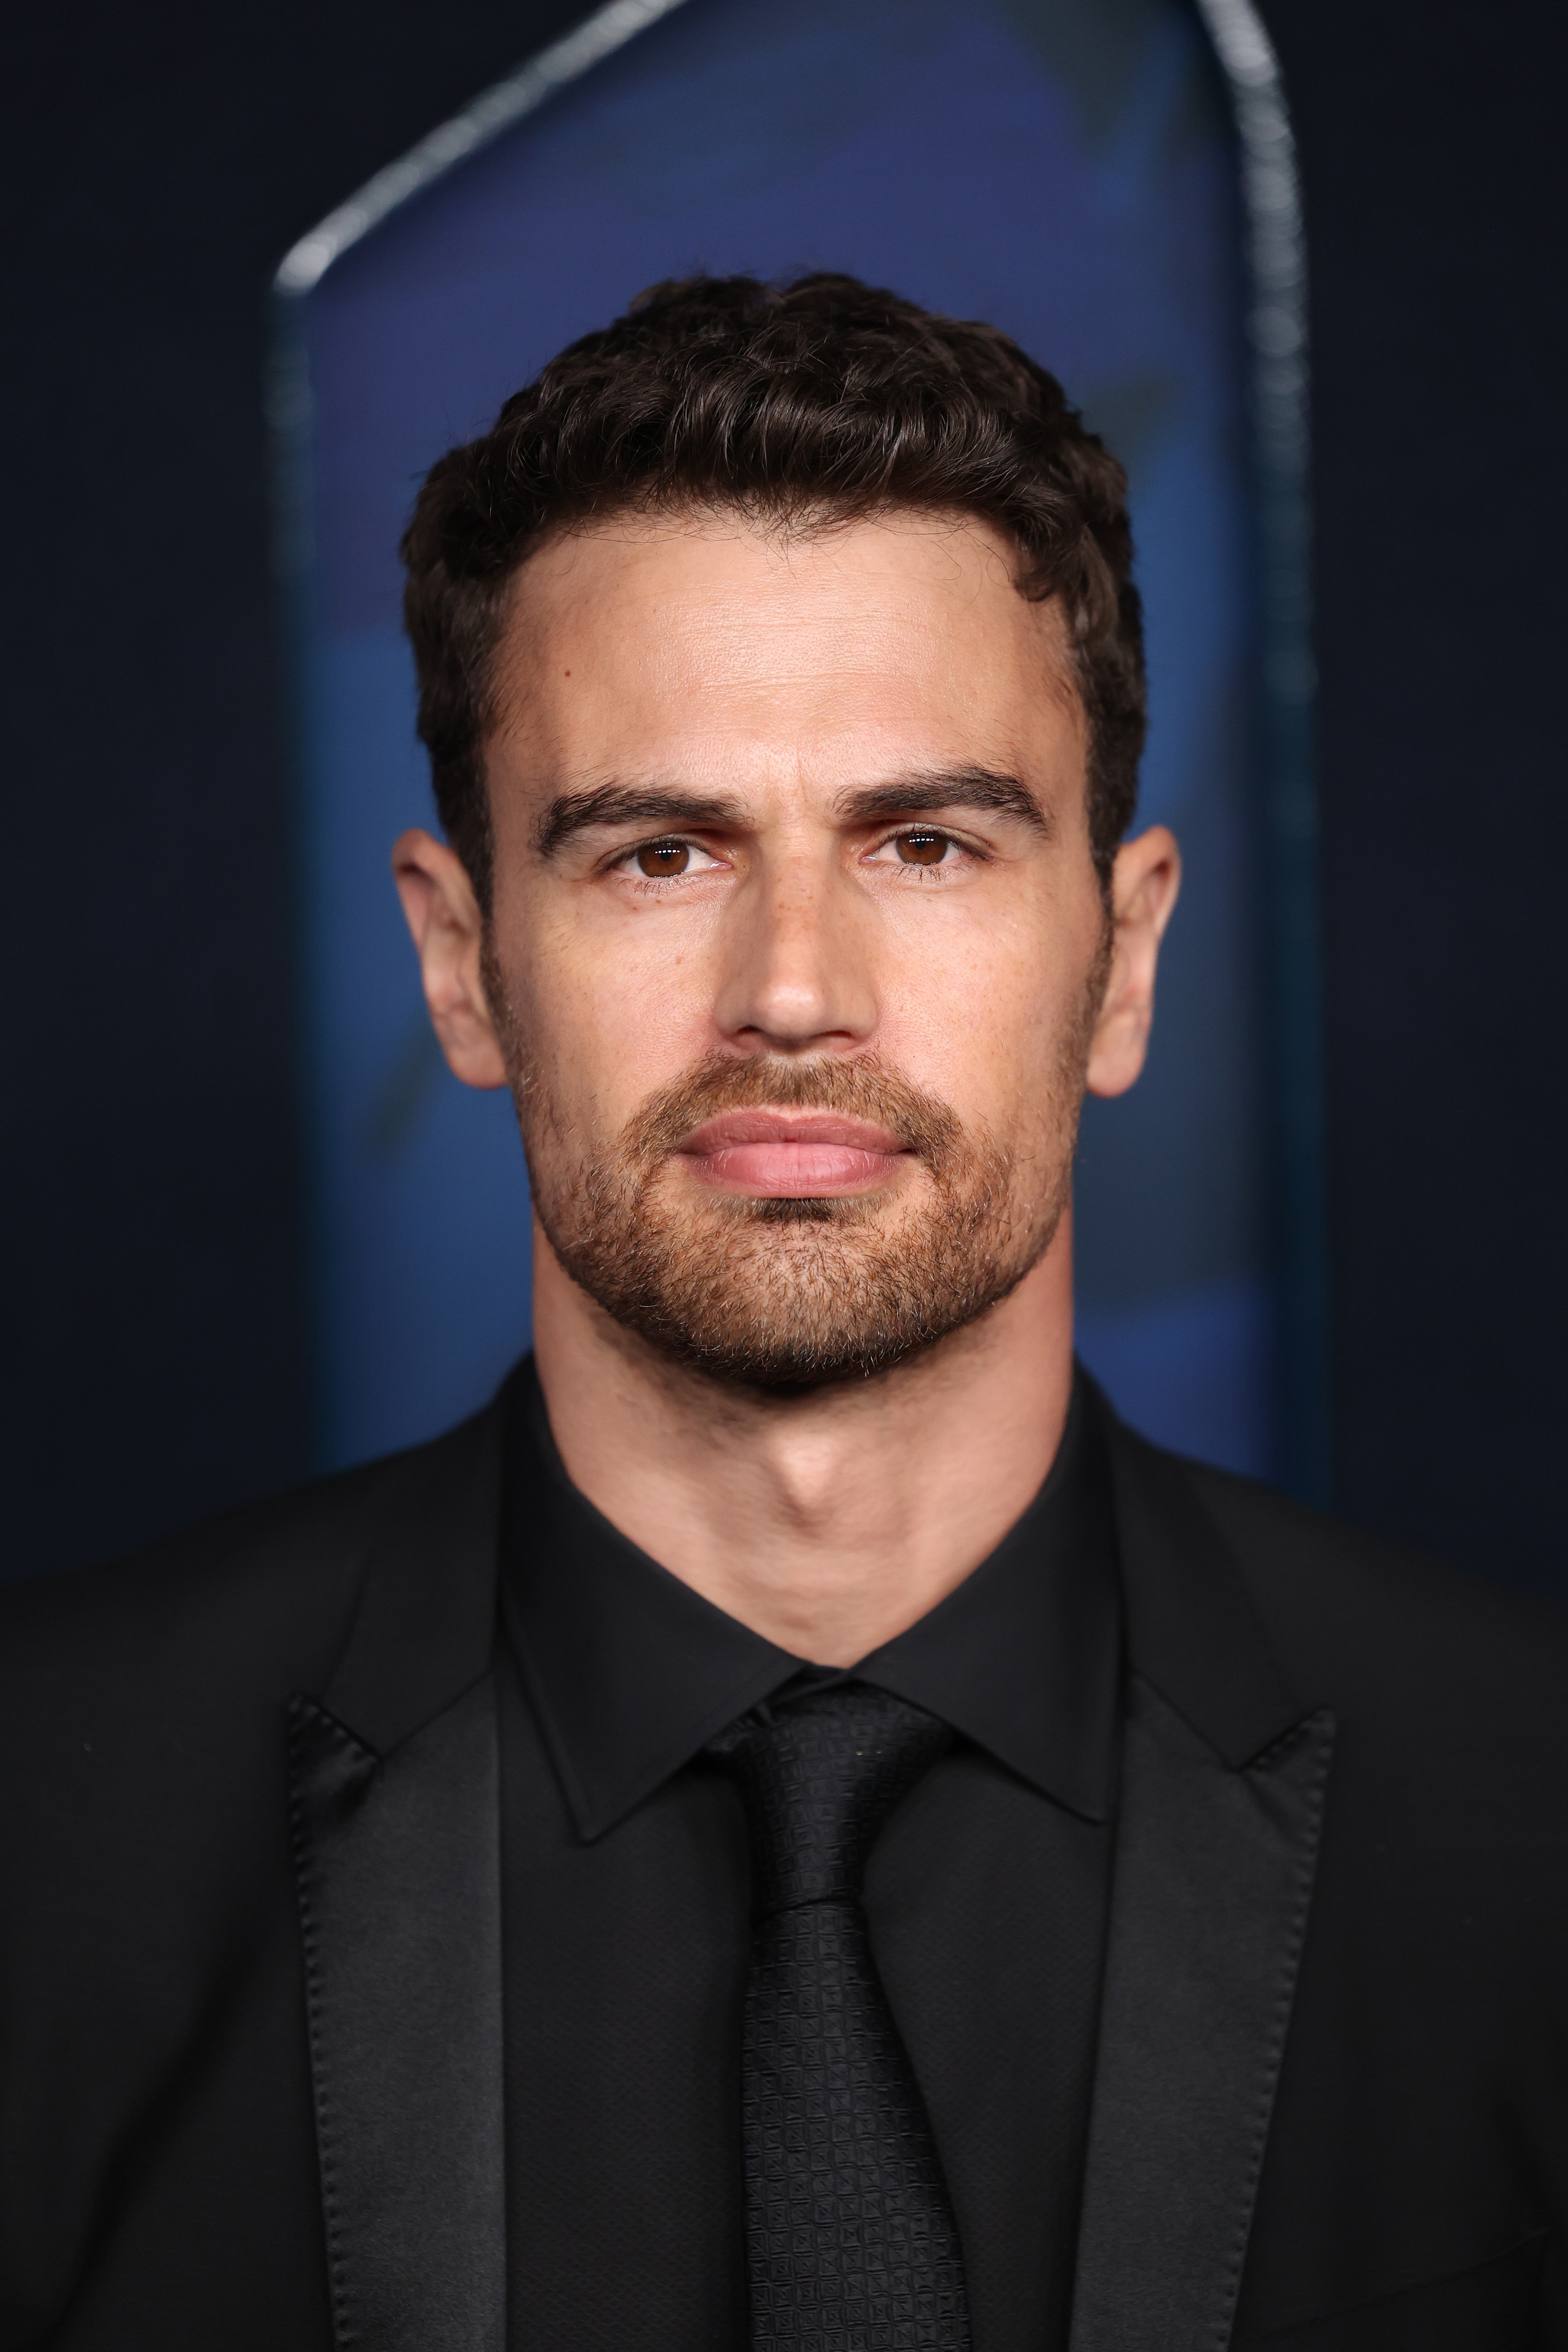 Theo in black suit and tie at an event, serious expression